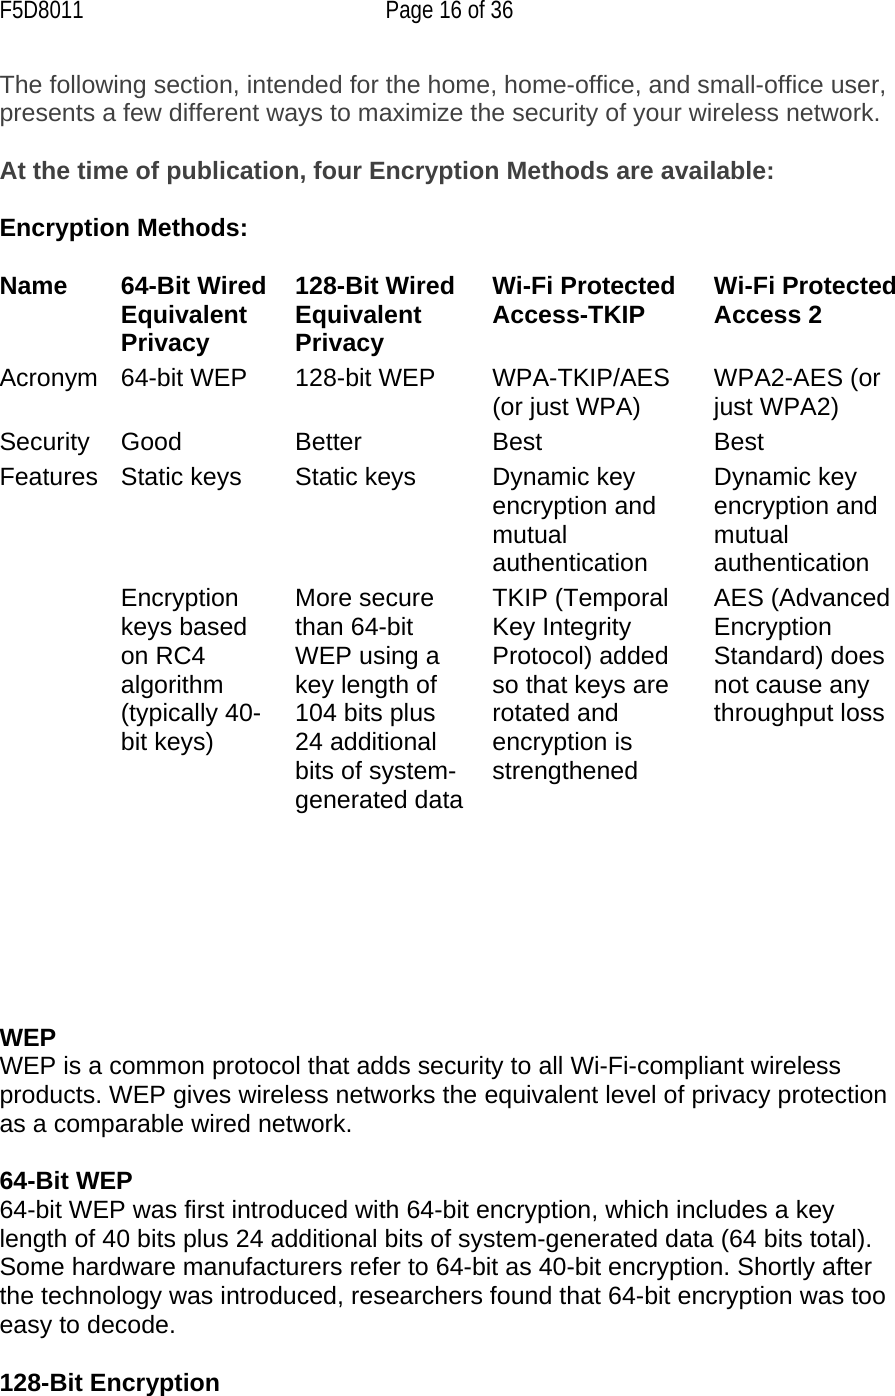 F5D8011  Page 16 of 36 The following section, intended for the home, home-office, and small-office user, presents a few different ways to maximize the security of your wireless network.  At the time of publication, four Encryption Methods are available:  Encryption Methods:  Name 64-Bit Wired Equivalent Privacy128-Bit Wired Equivalent PrivacyWi-Fi Protected Access-TKIP Wi-Fi Protected Access 2 Acronym 64-bit WEP 128-bit WEP WPA-TKIP/AES (or just WPA) WPA2-AES (or just WPA2)Security Good Better Best BestFeatures Static keys  Static keys  Dynamic key encryption and mutual authenticationDynamic key encryption and mutual authentication Encryption keys based on RC4 algorithm (typically 40-bit keys)More secure than 64-bit WEP using a key length of 104 bits plus 24 additional bits of system-generated dataTKIP (Temporal Key Integrity Protocol) added so that keys are rotated and encryption is strengthenedAES (Advanced Encryption Standard) does not cause any throughput loss      WEP  WEP is a common protocol that adds security to all Wi-Fi-compliant wireless products. WEP gives wireless networks the equivalent level of privacy protection as a comparable wired network.  64-Bit WEP 64-bit WEP was first introduced with 64-bit encryption, which includes a key length of 40 bits plus 24 additional bits of system-generated data (64 bits total). Some hardware manufacturers refer to 64-bit as 40-bit encryption. Shortly after the technology was introduced, researchers found that 64-bit encryption was too easy to decode.  128-Bit Encryption 